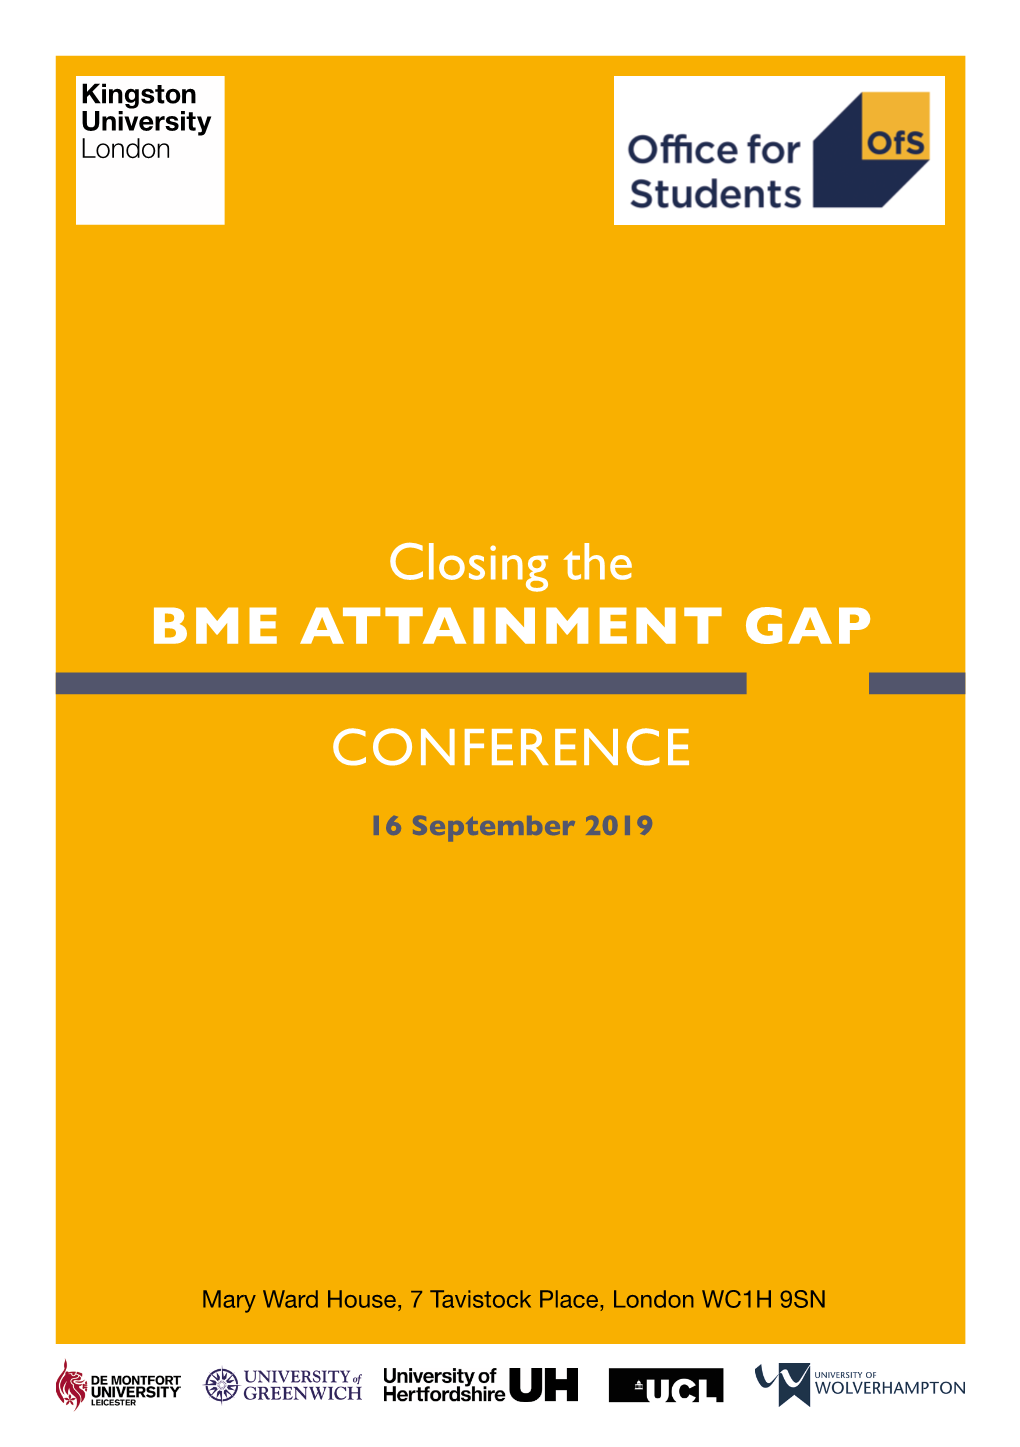 Closing the BME ATTAINMENT GAP CONFERENCE